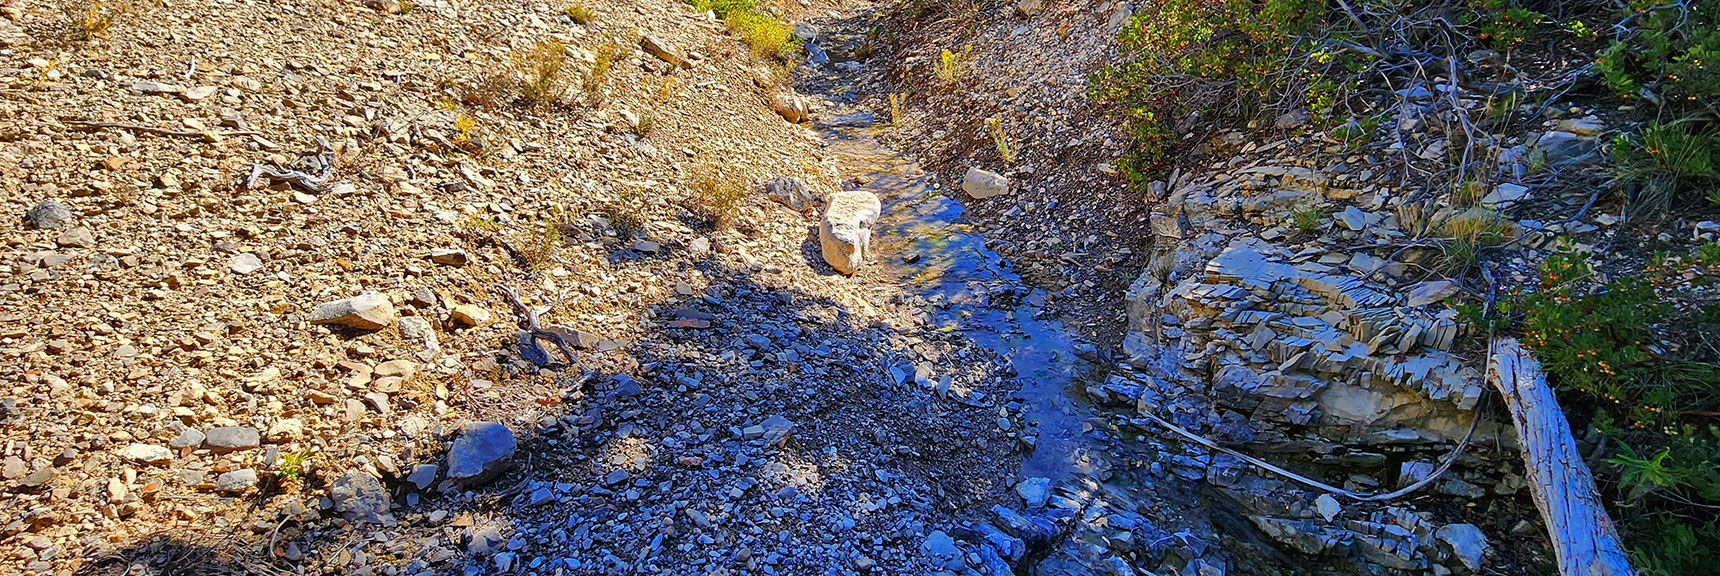 Sheep Spring Flowing Year 'Round Would Have Been Water Source for Irrigation System | Switchback Spring Pinnacle | Wilson Ridge | Lovell Canyon, Nevada